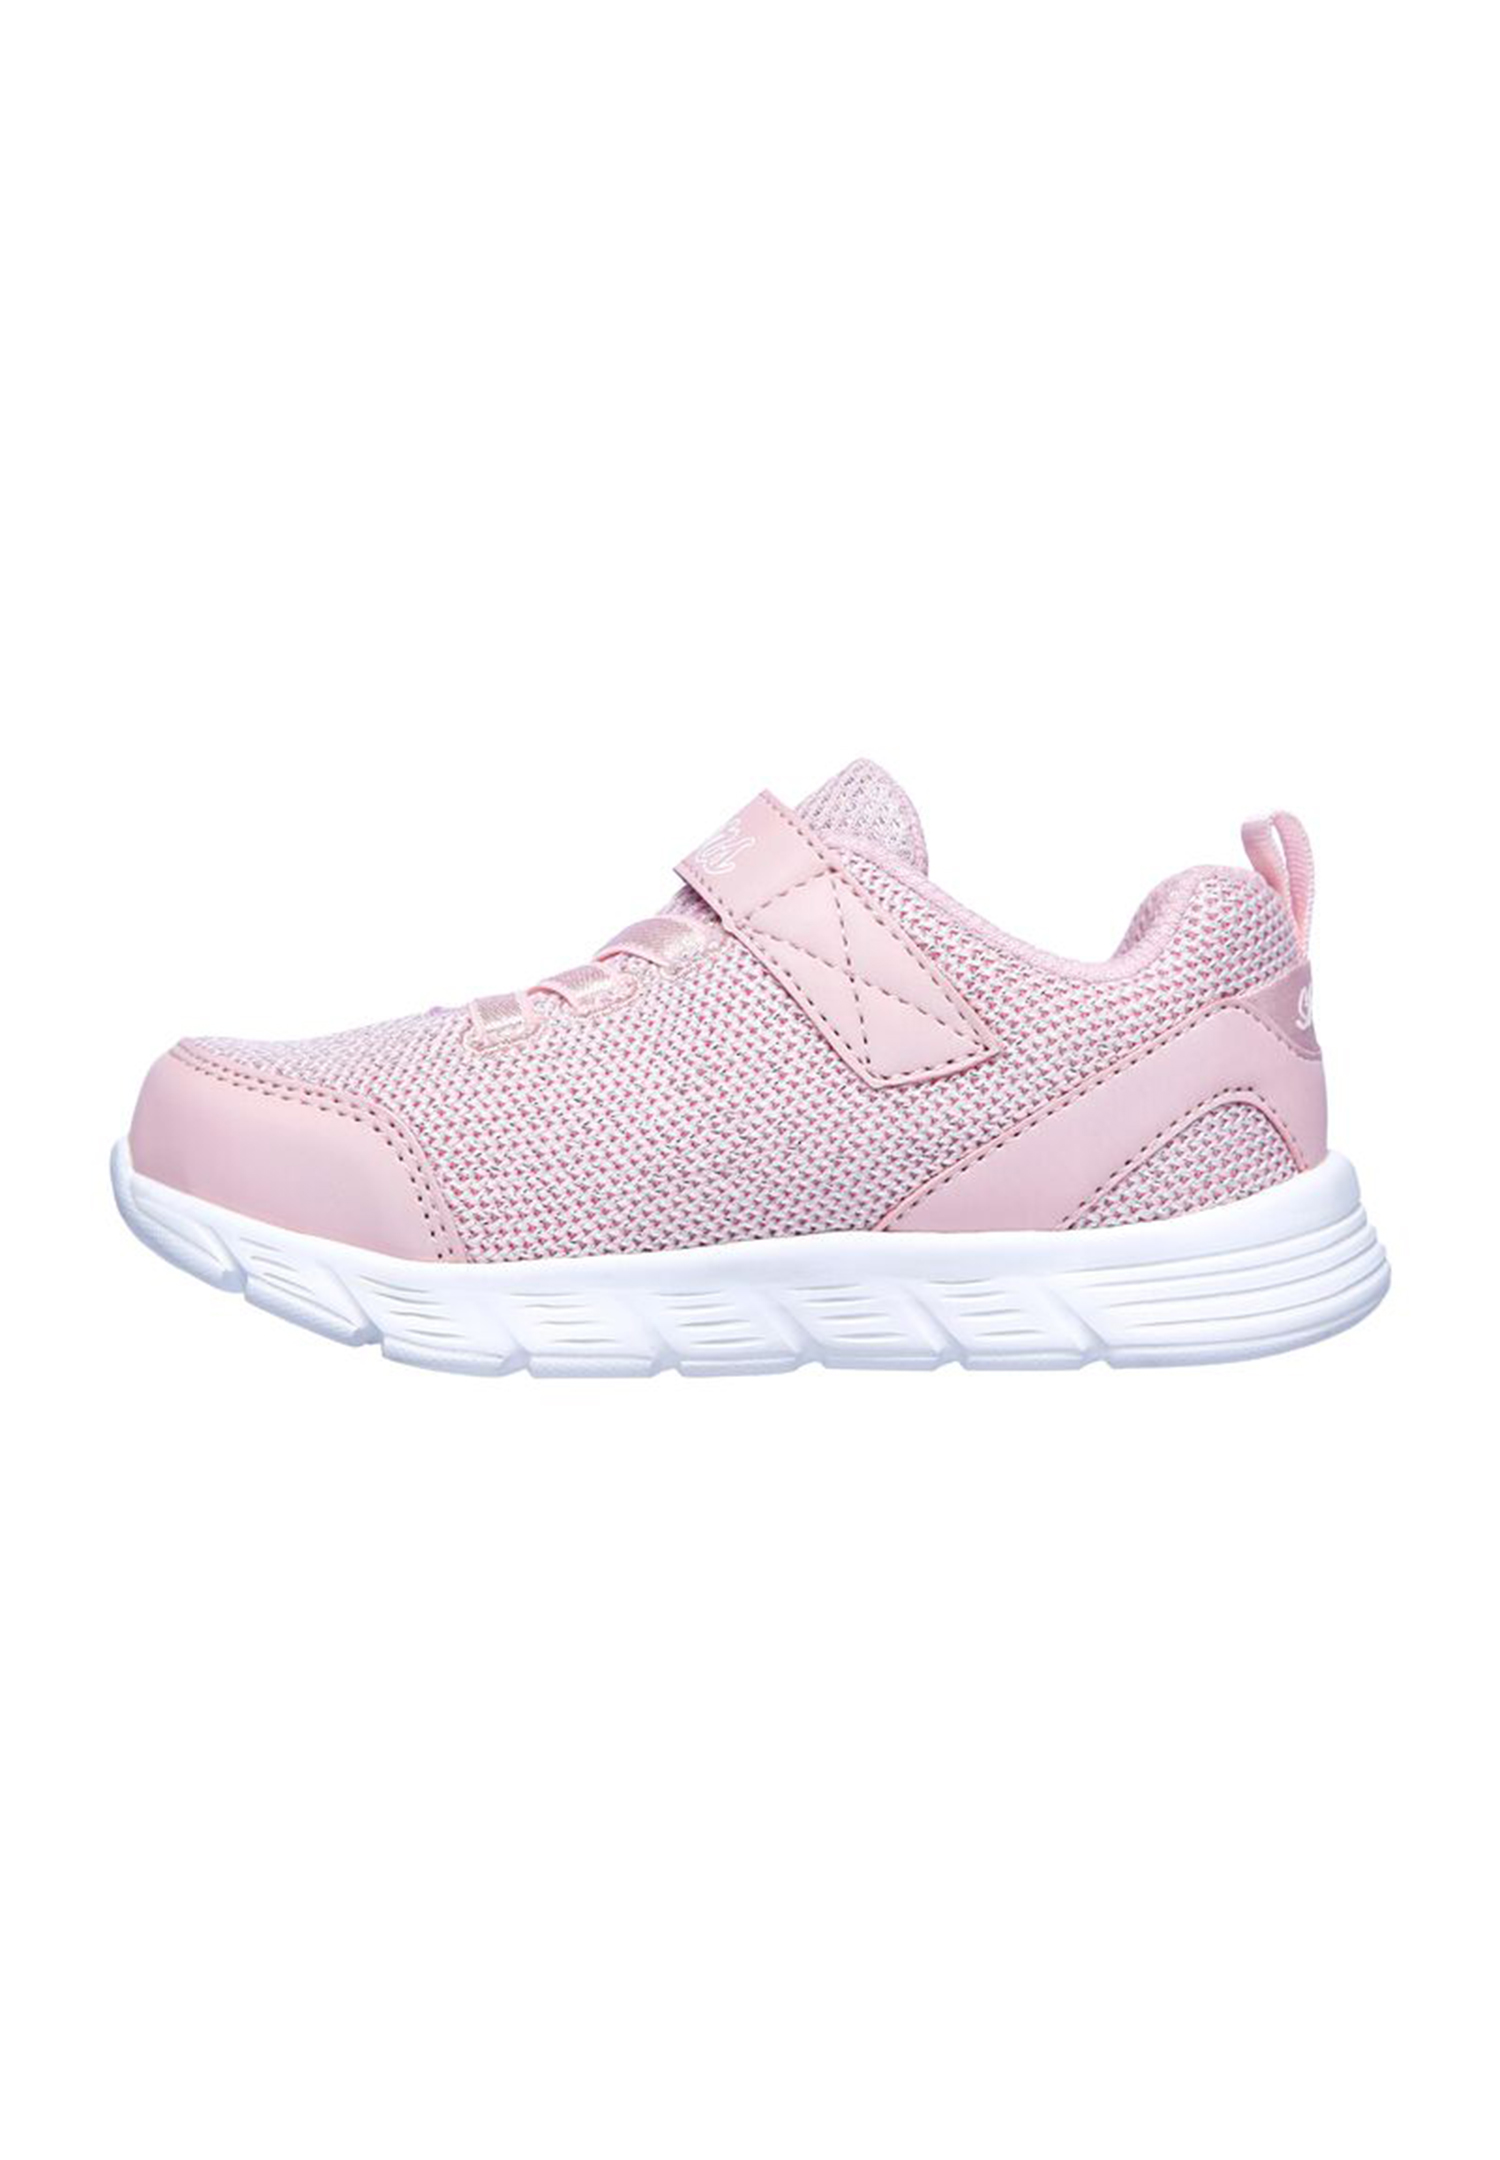 Skechers TODDLERS Comfy Flex MOVING ON Sneakers baby pink 302107N LTPK